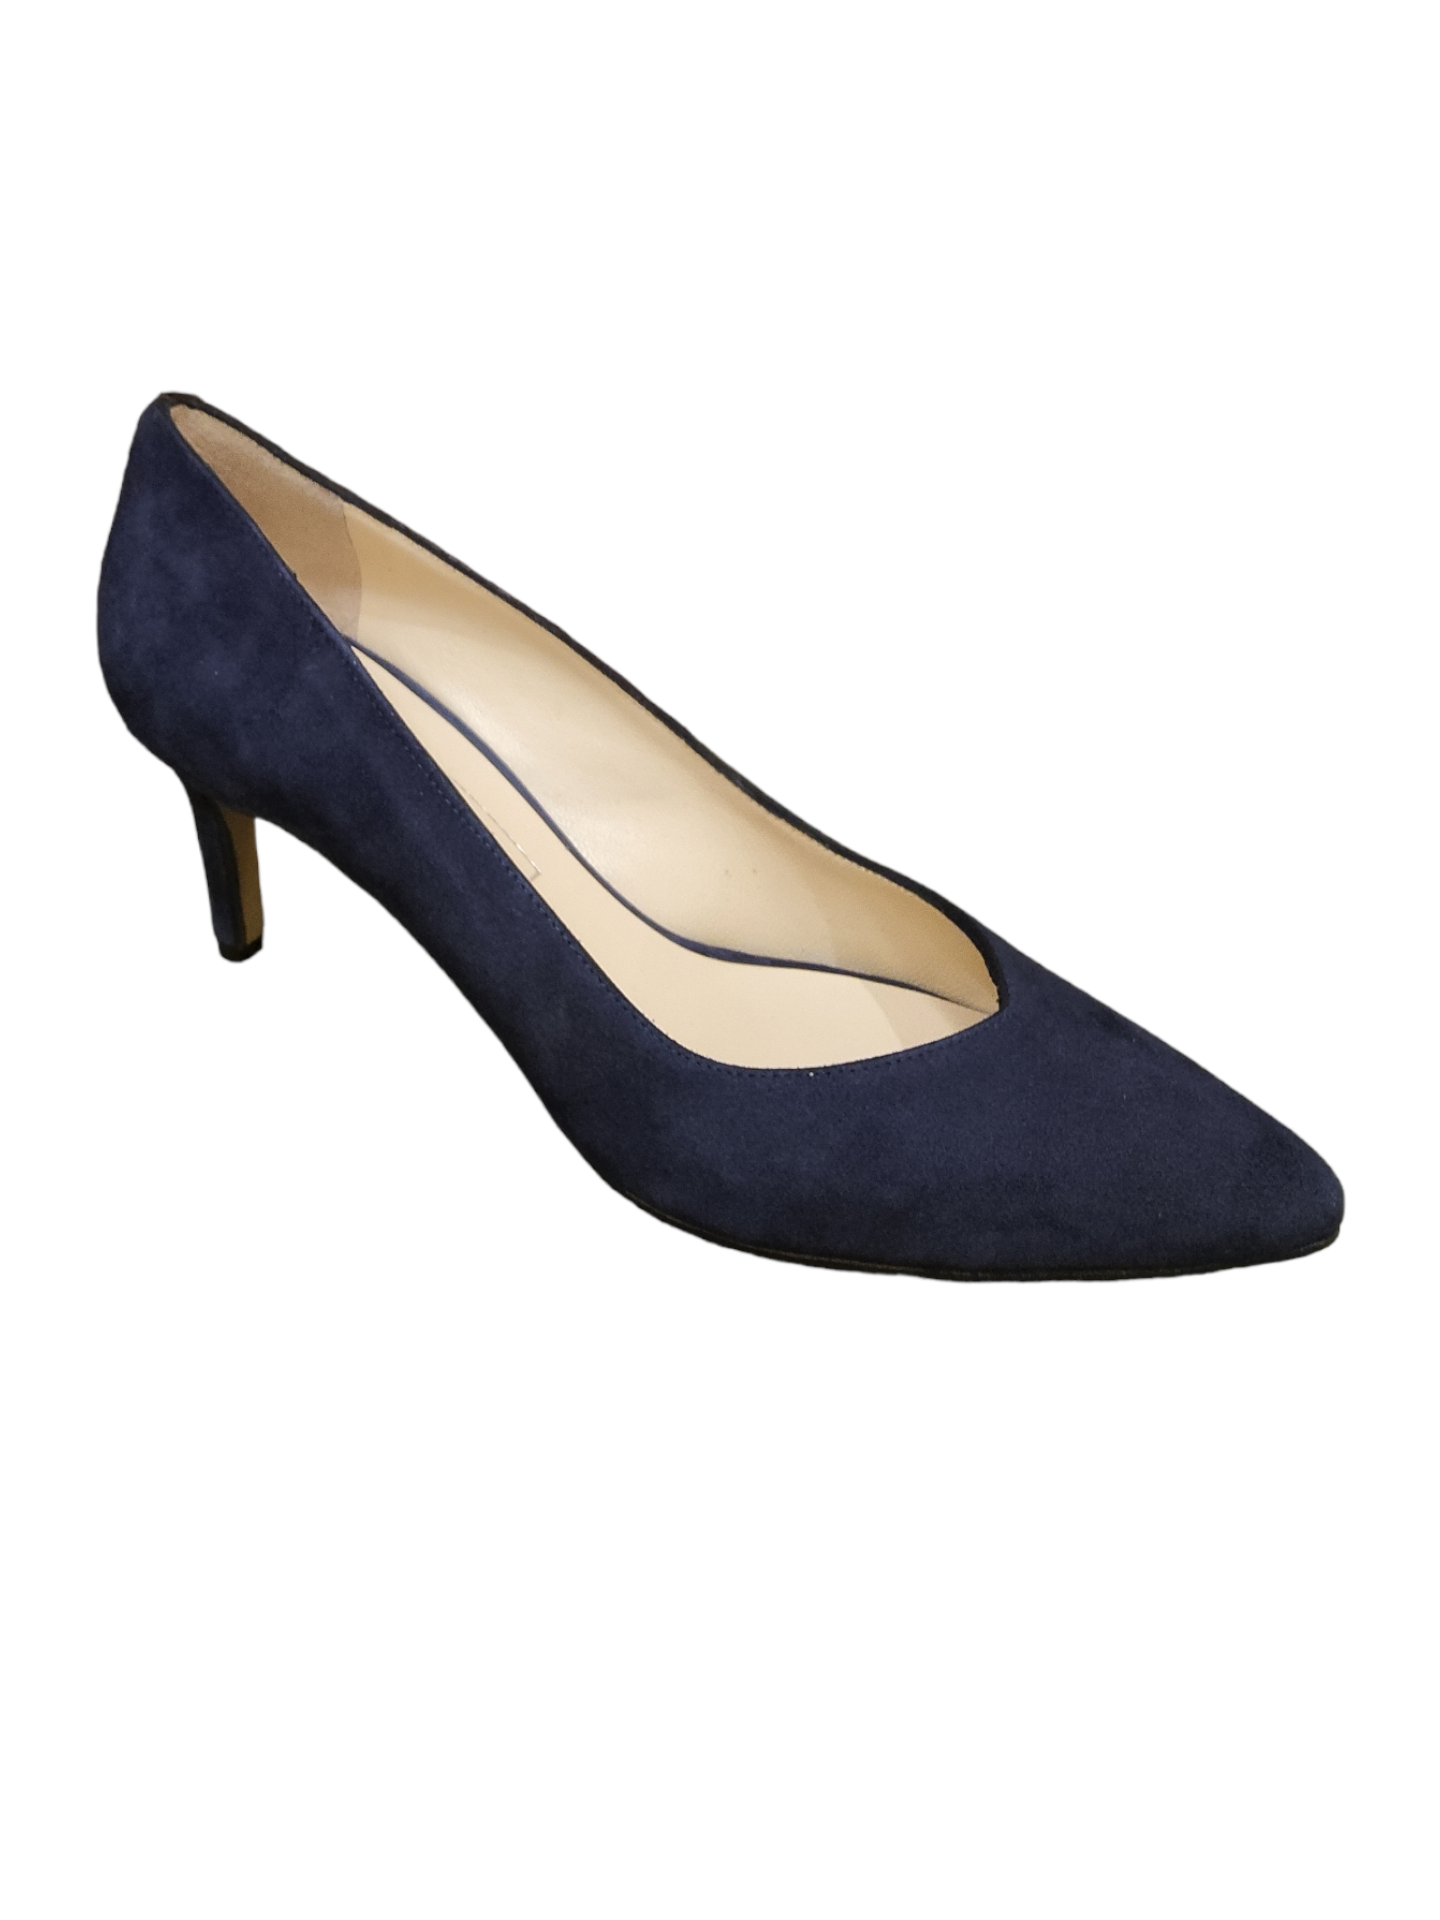 Navy leather court shoe